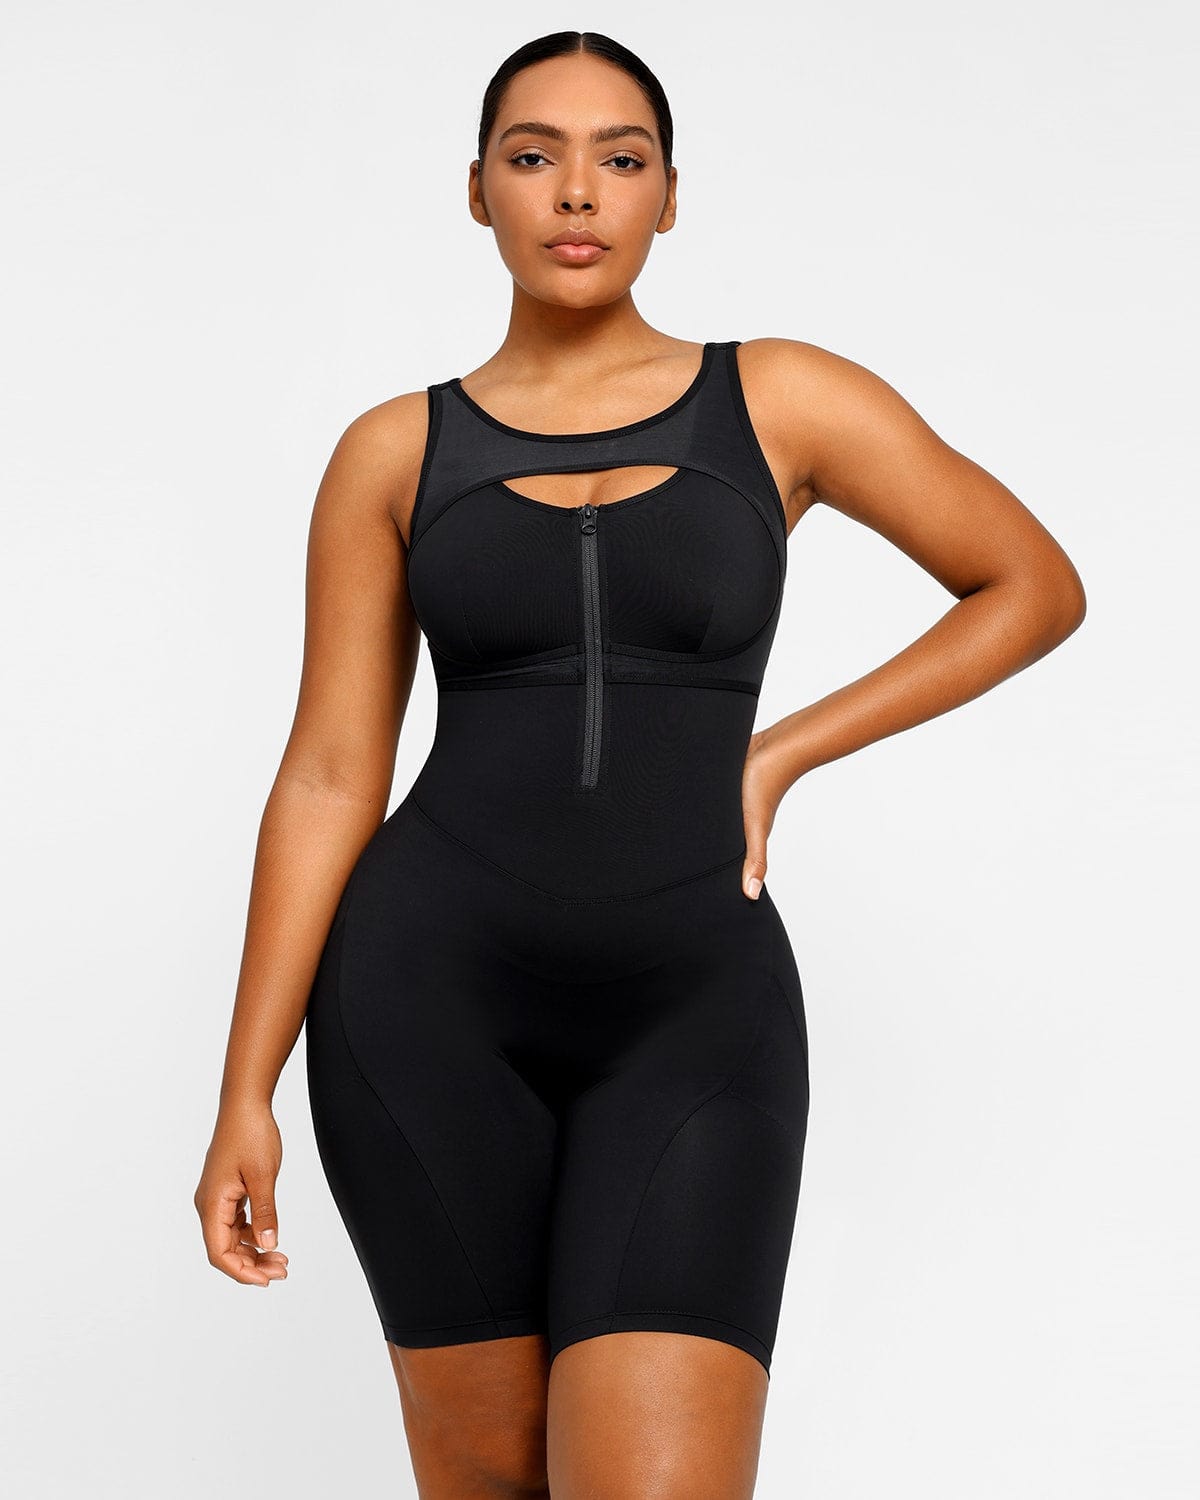 AirSlim® PowerFit Supportive Workout Jumpsuit